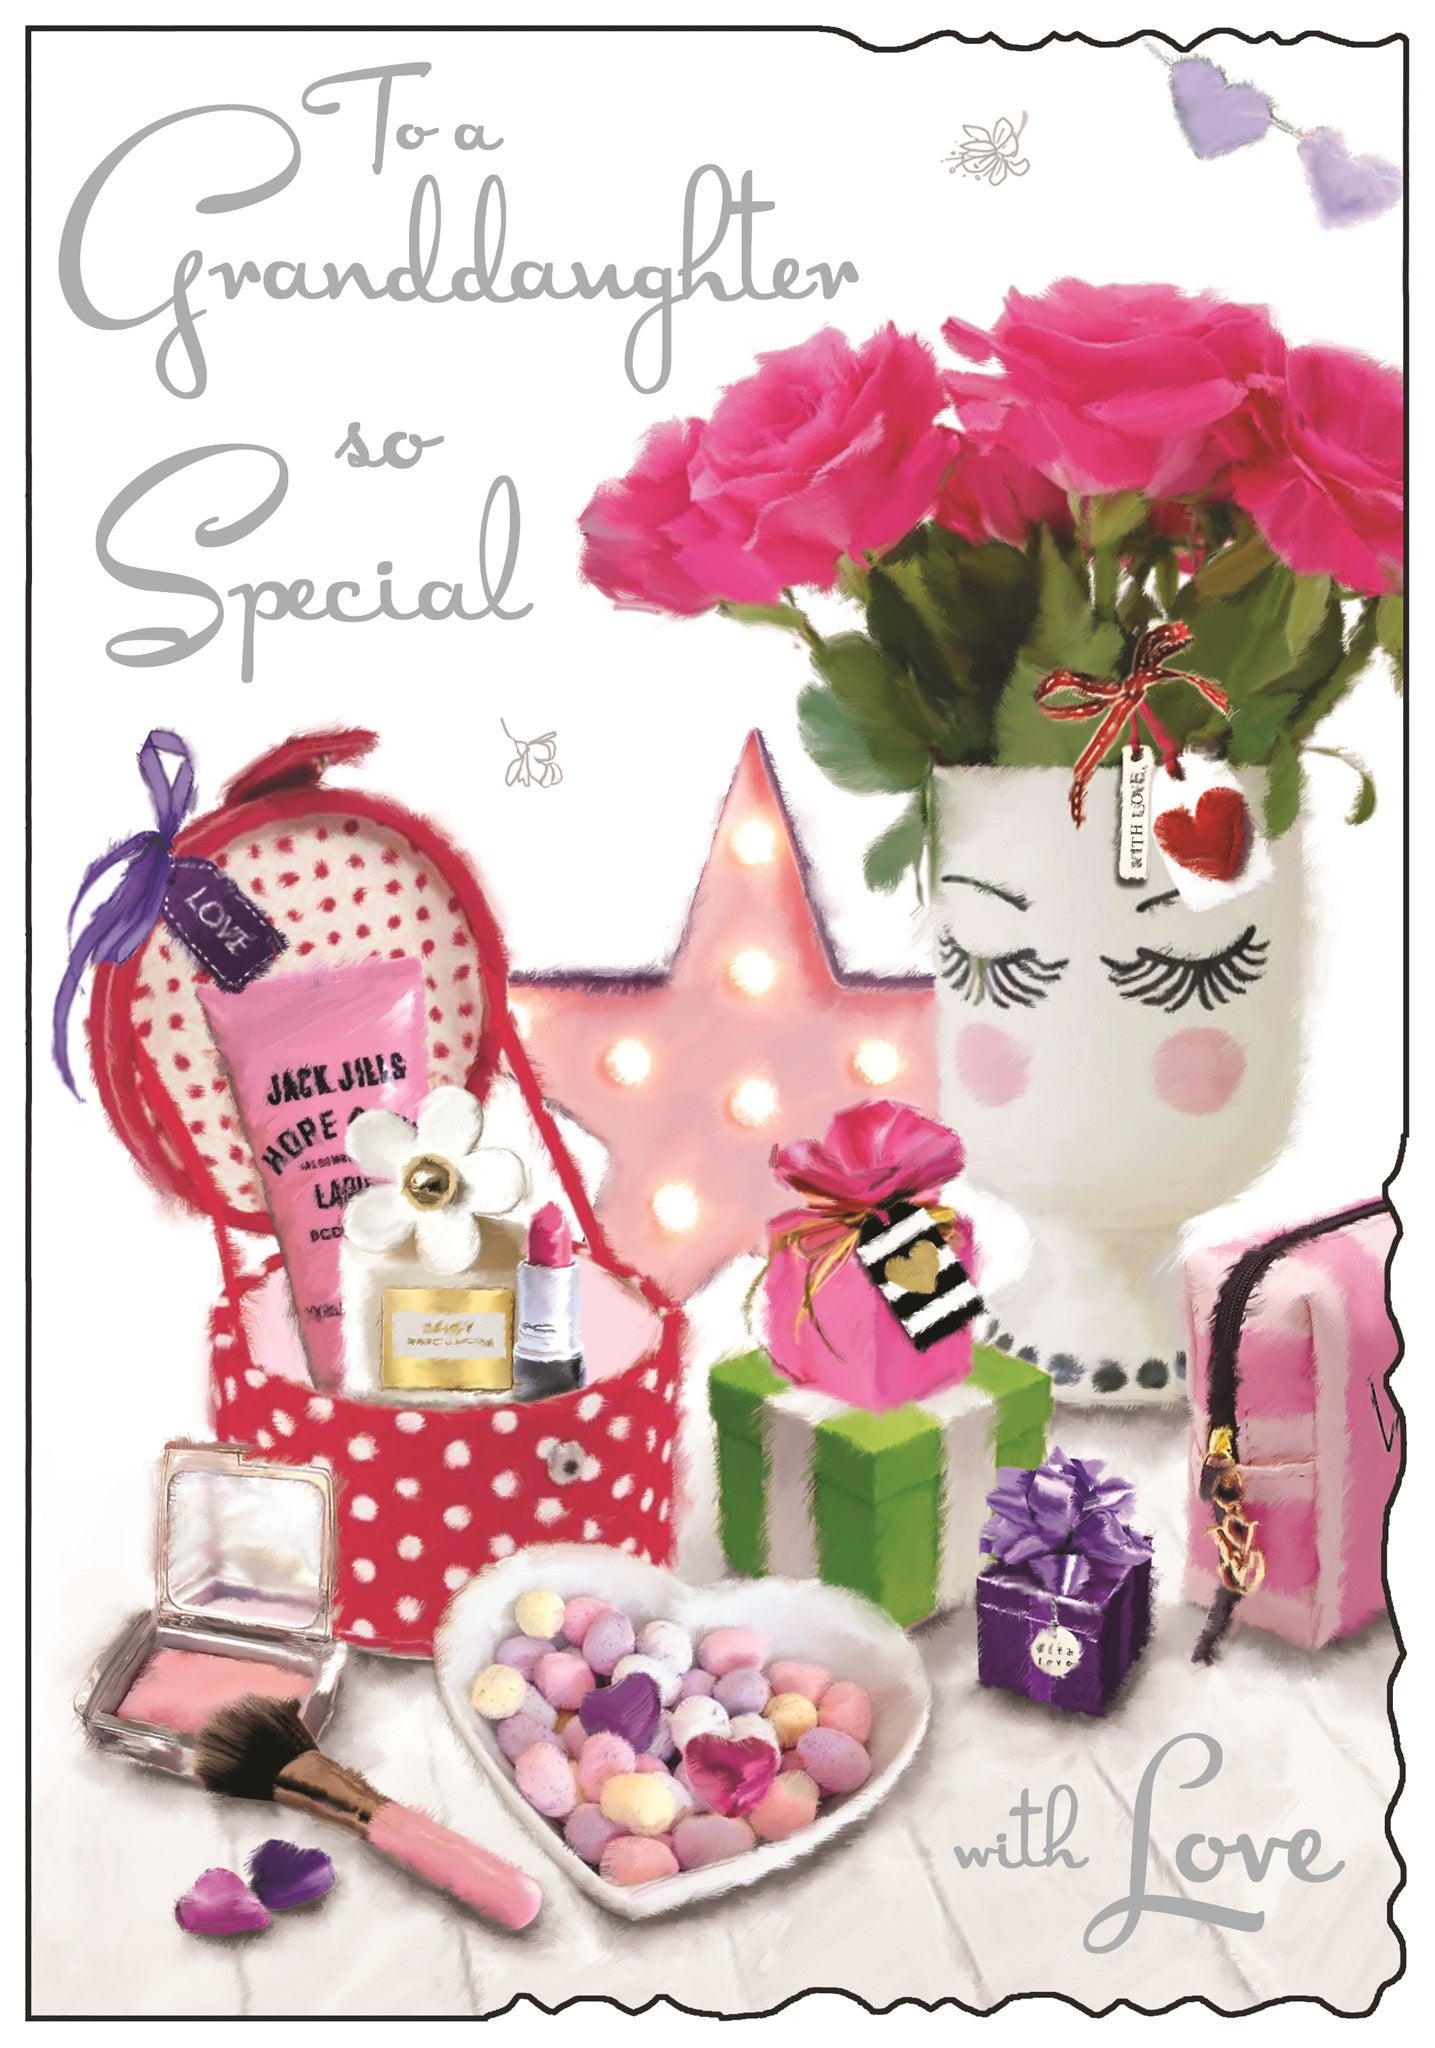 Granddaughter Birthday Card - Gifts, Flowers and Make Up